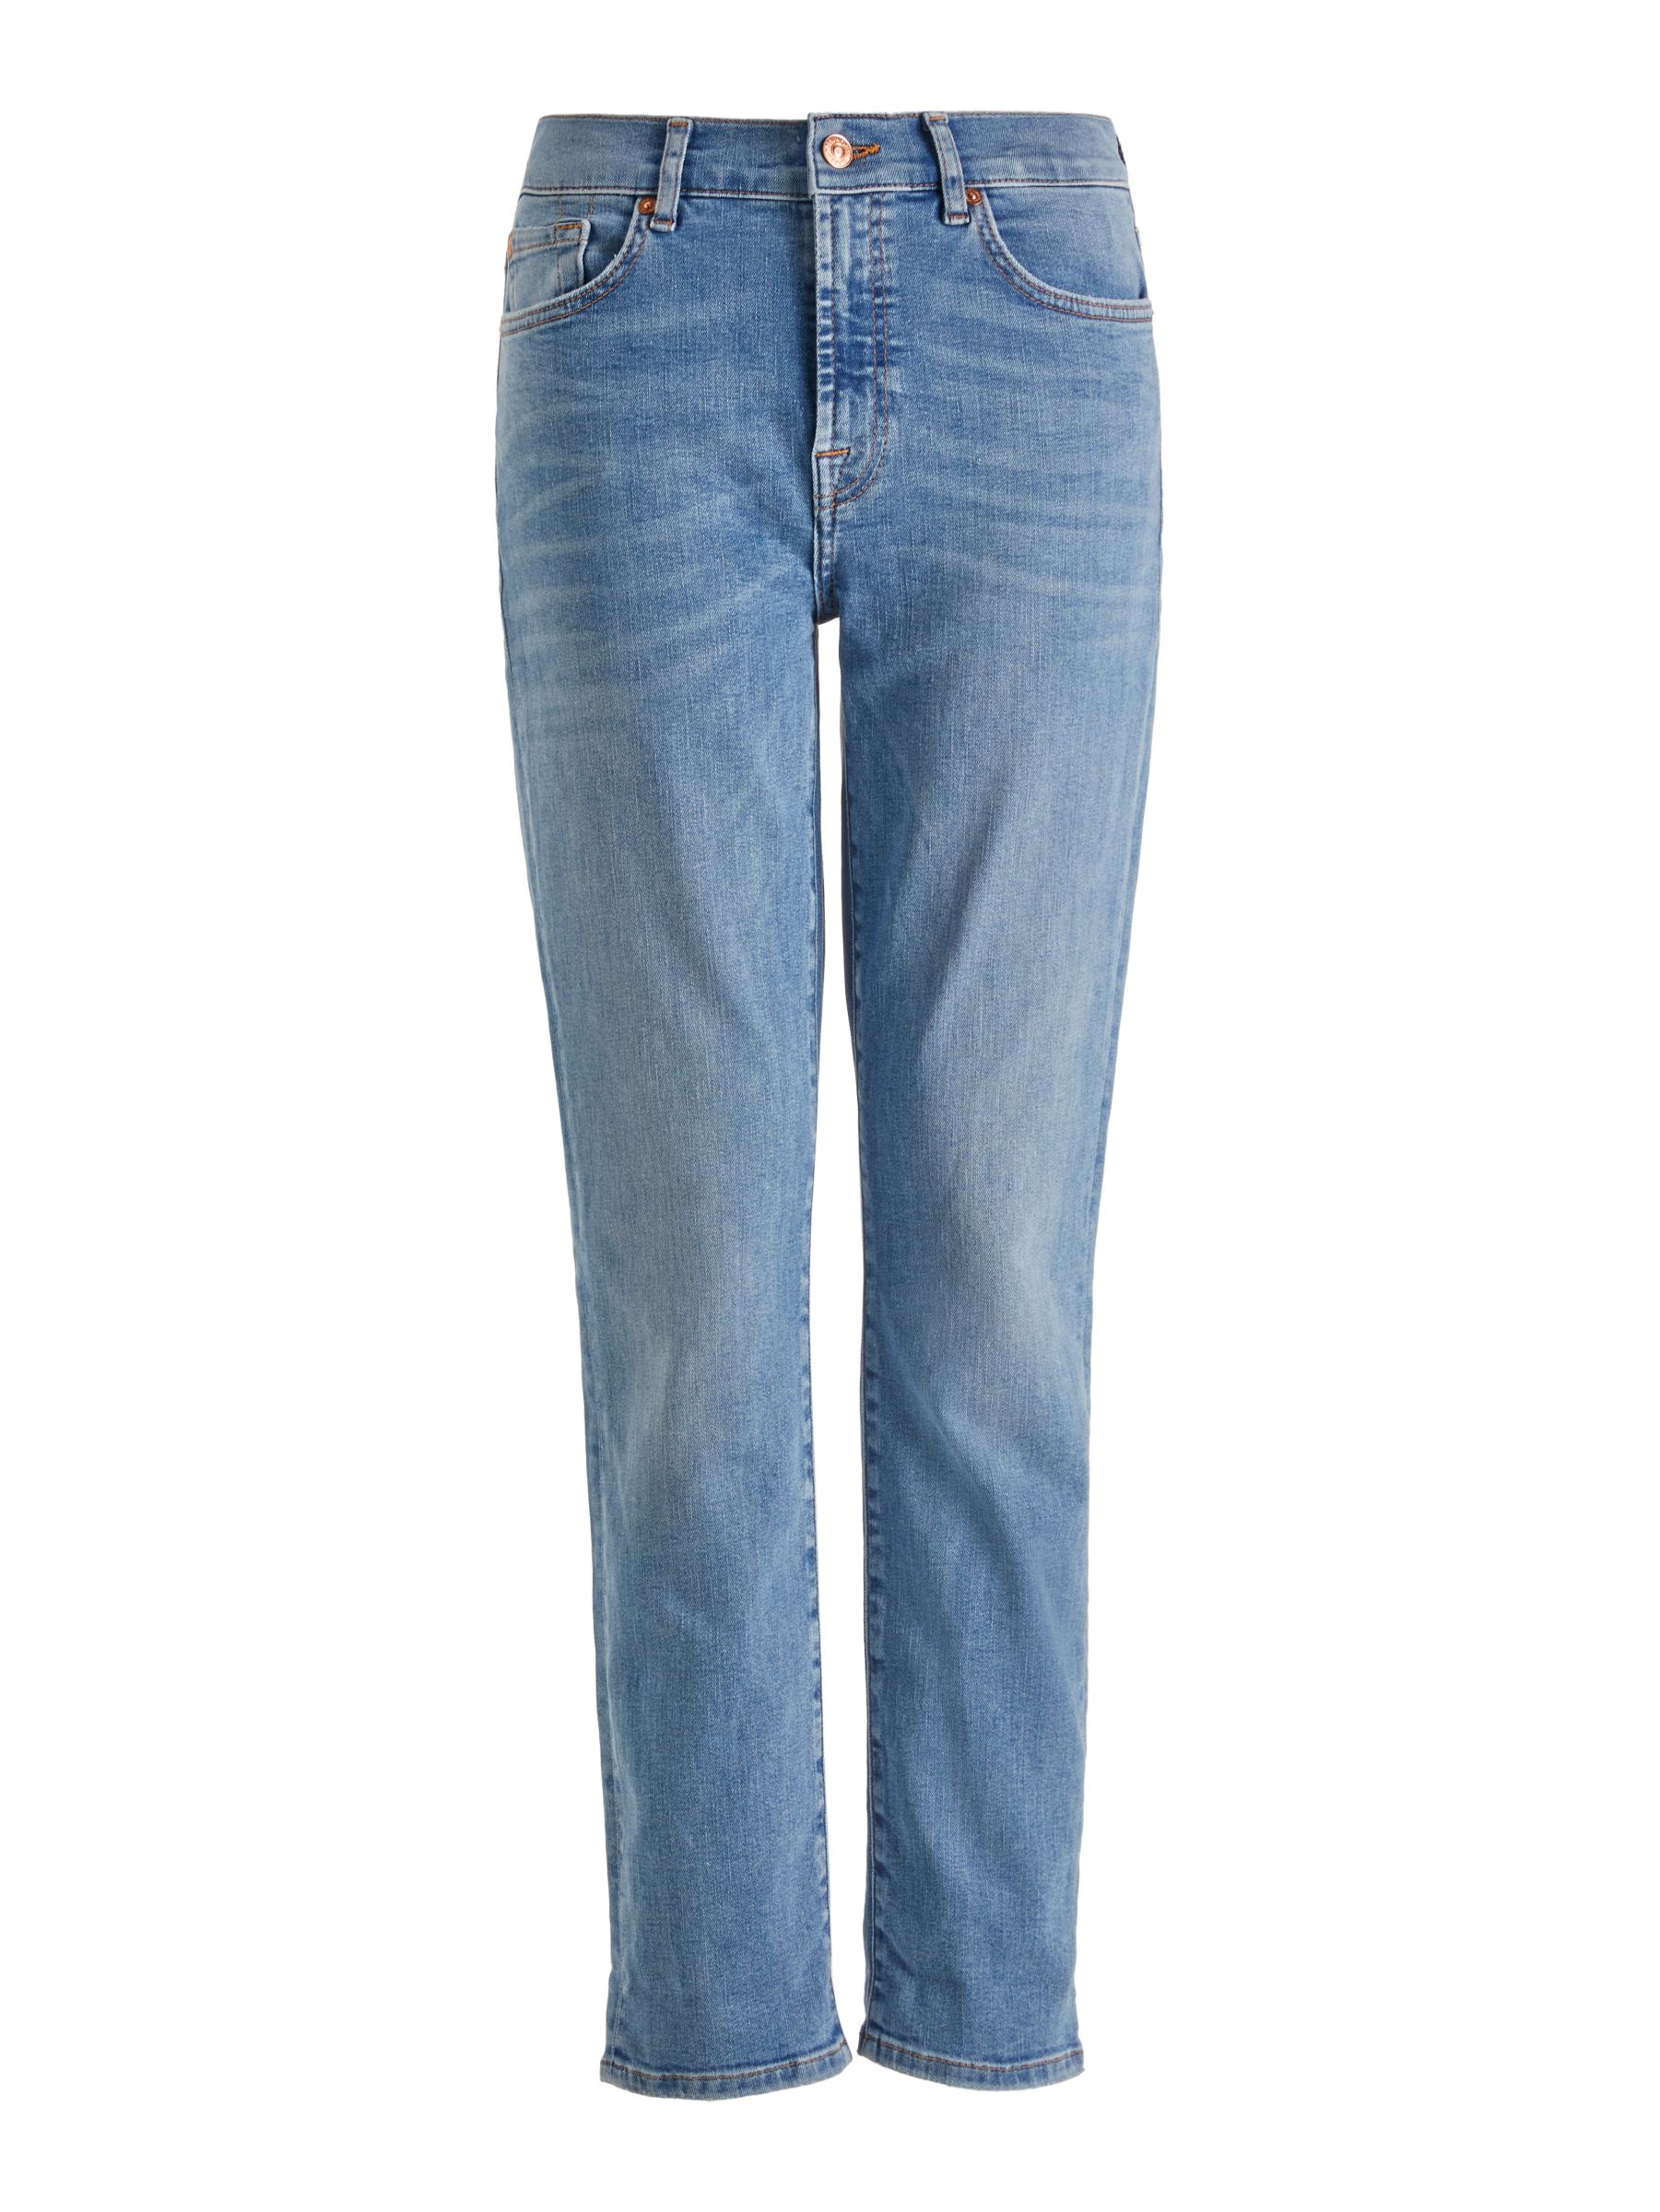 7 For All Mankind Relaxed Skinny Slim Illusion Jeans, Departed Light Blue